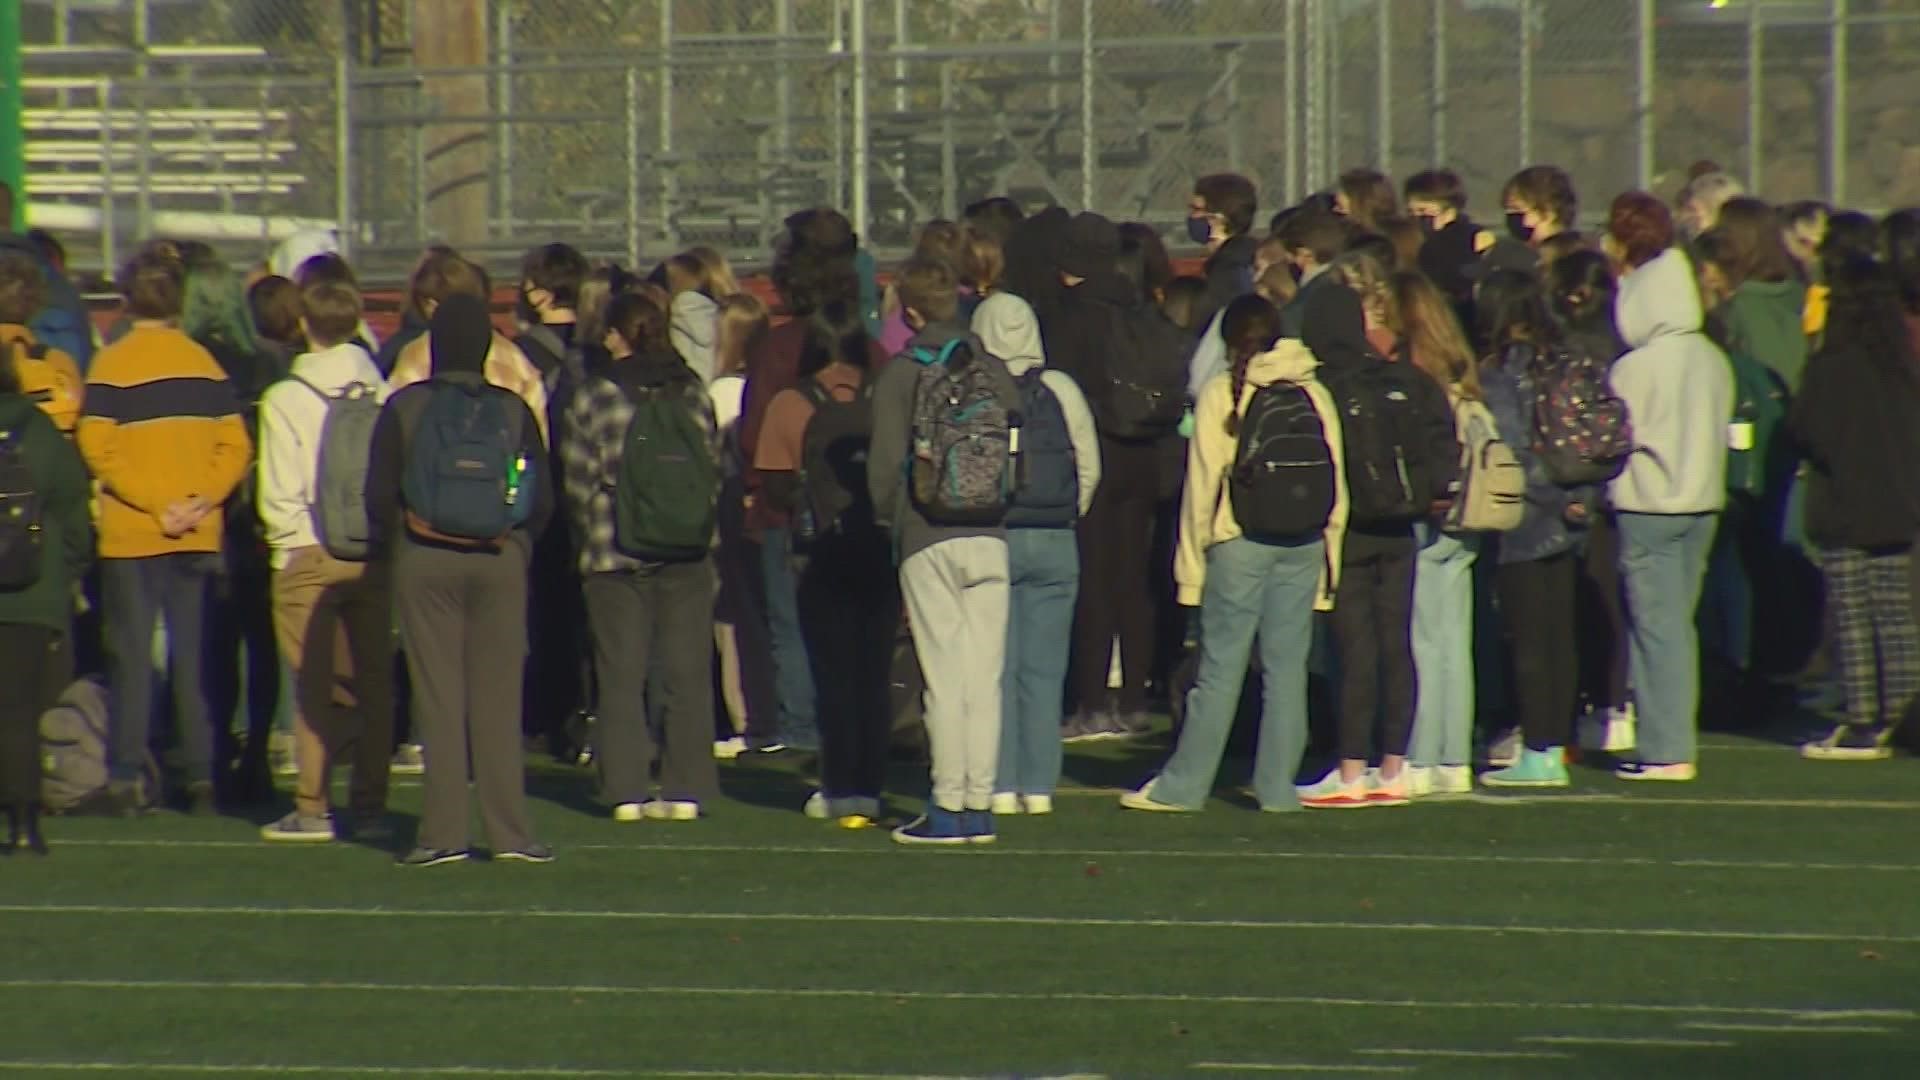 More than 100 students staged a walkout Tuesday at Cedarcrest High School over the school's response to a Halloween photo posted by students.